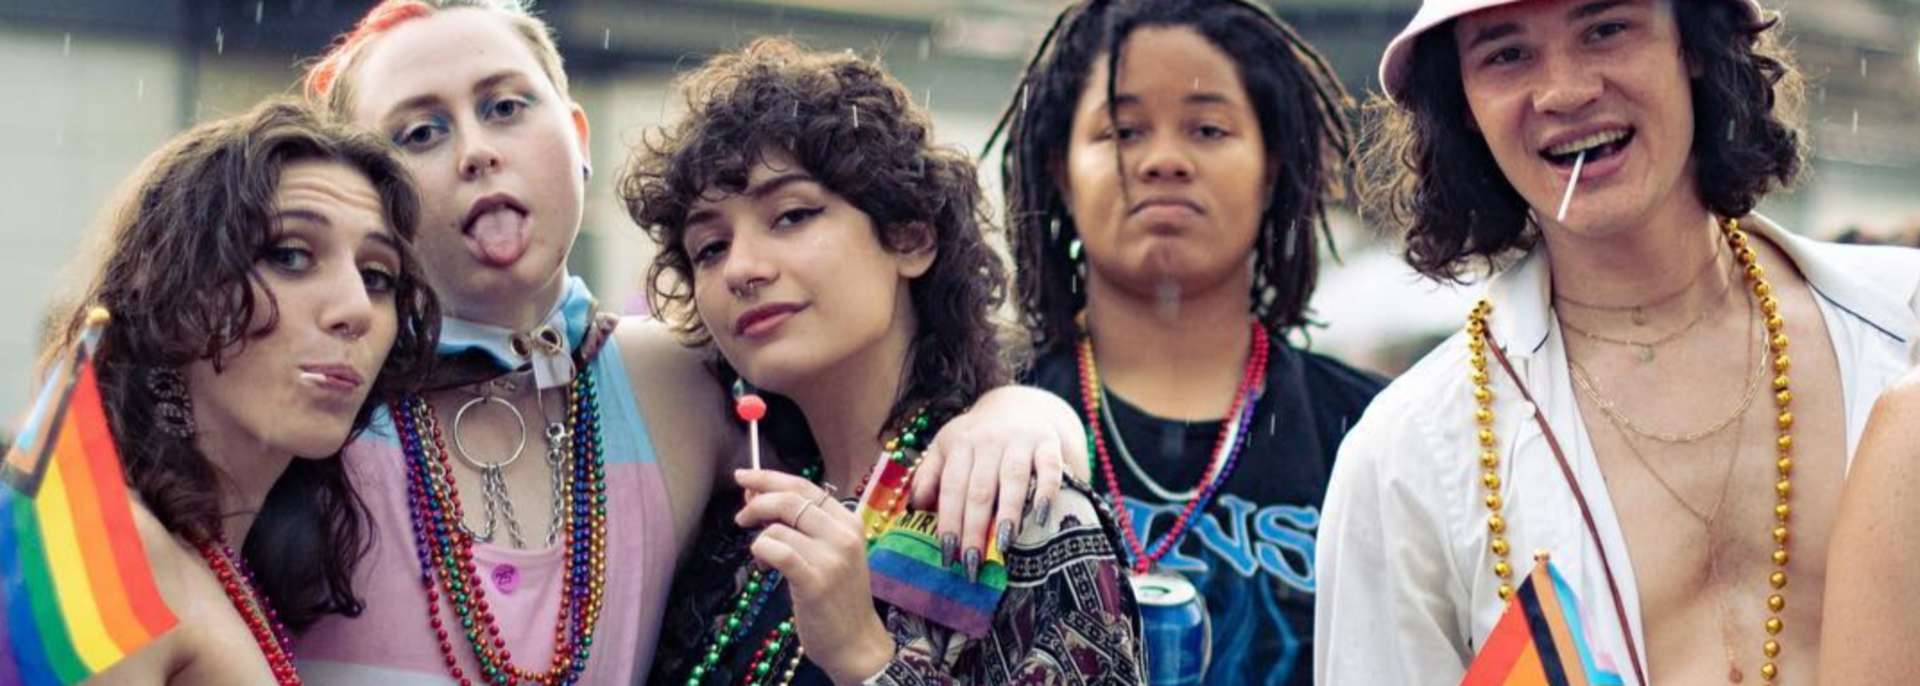 Lesbian and Queer Femme Nightlife | LGBTQ New Orleans